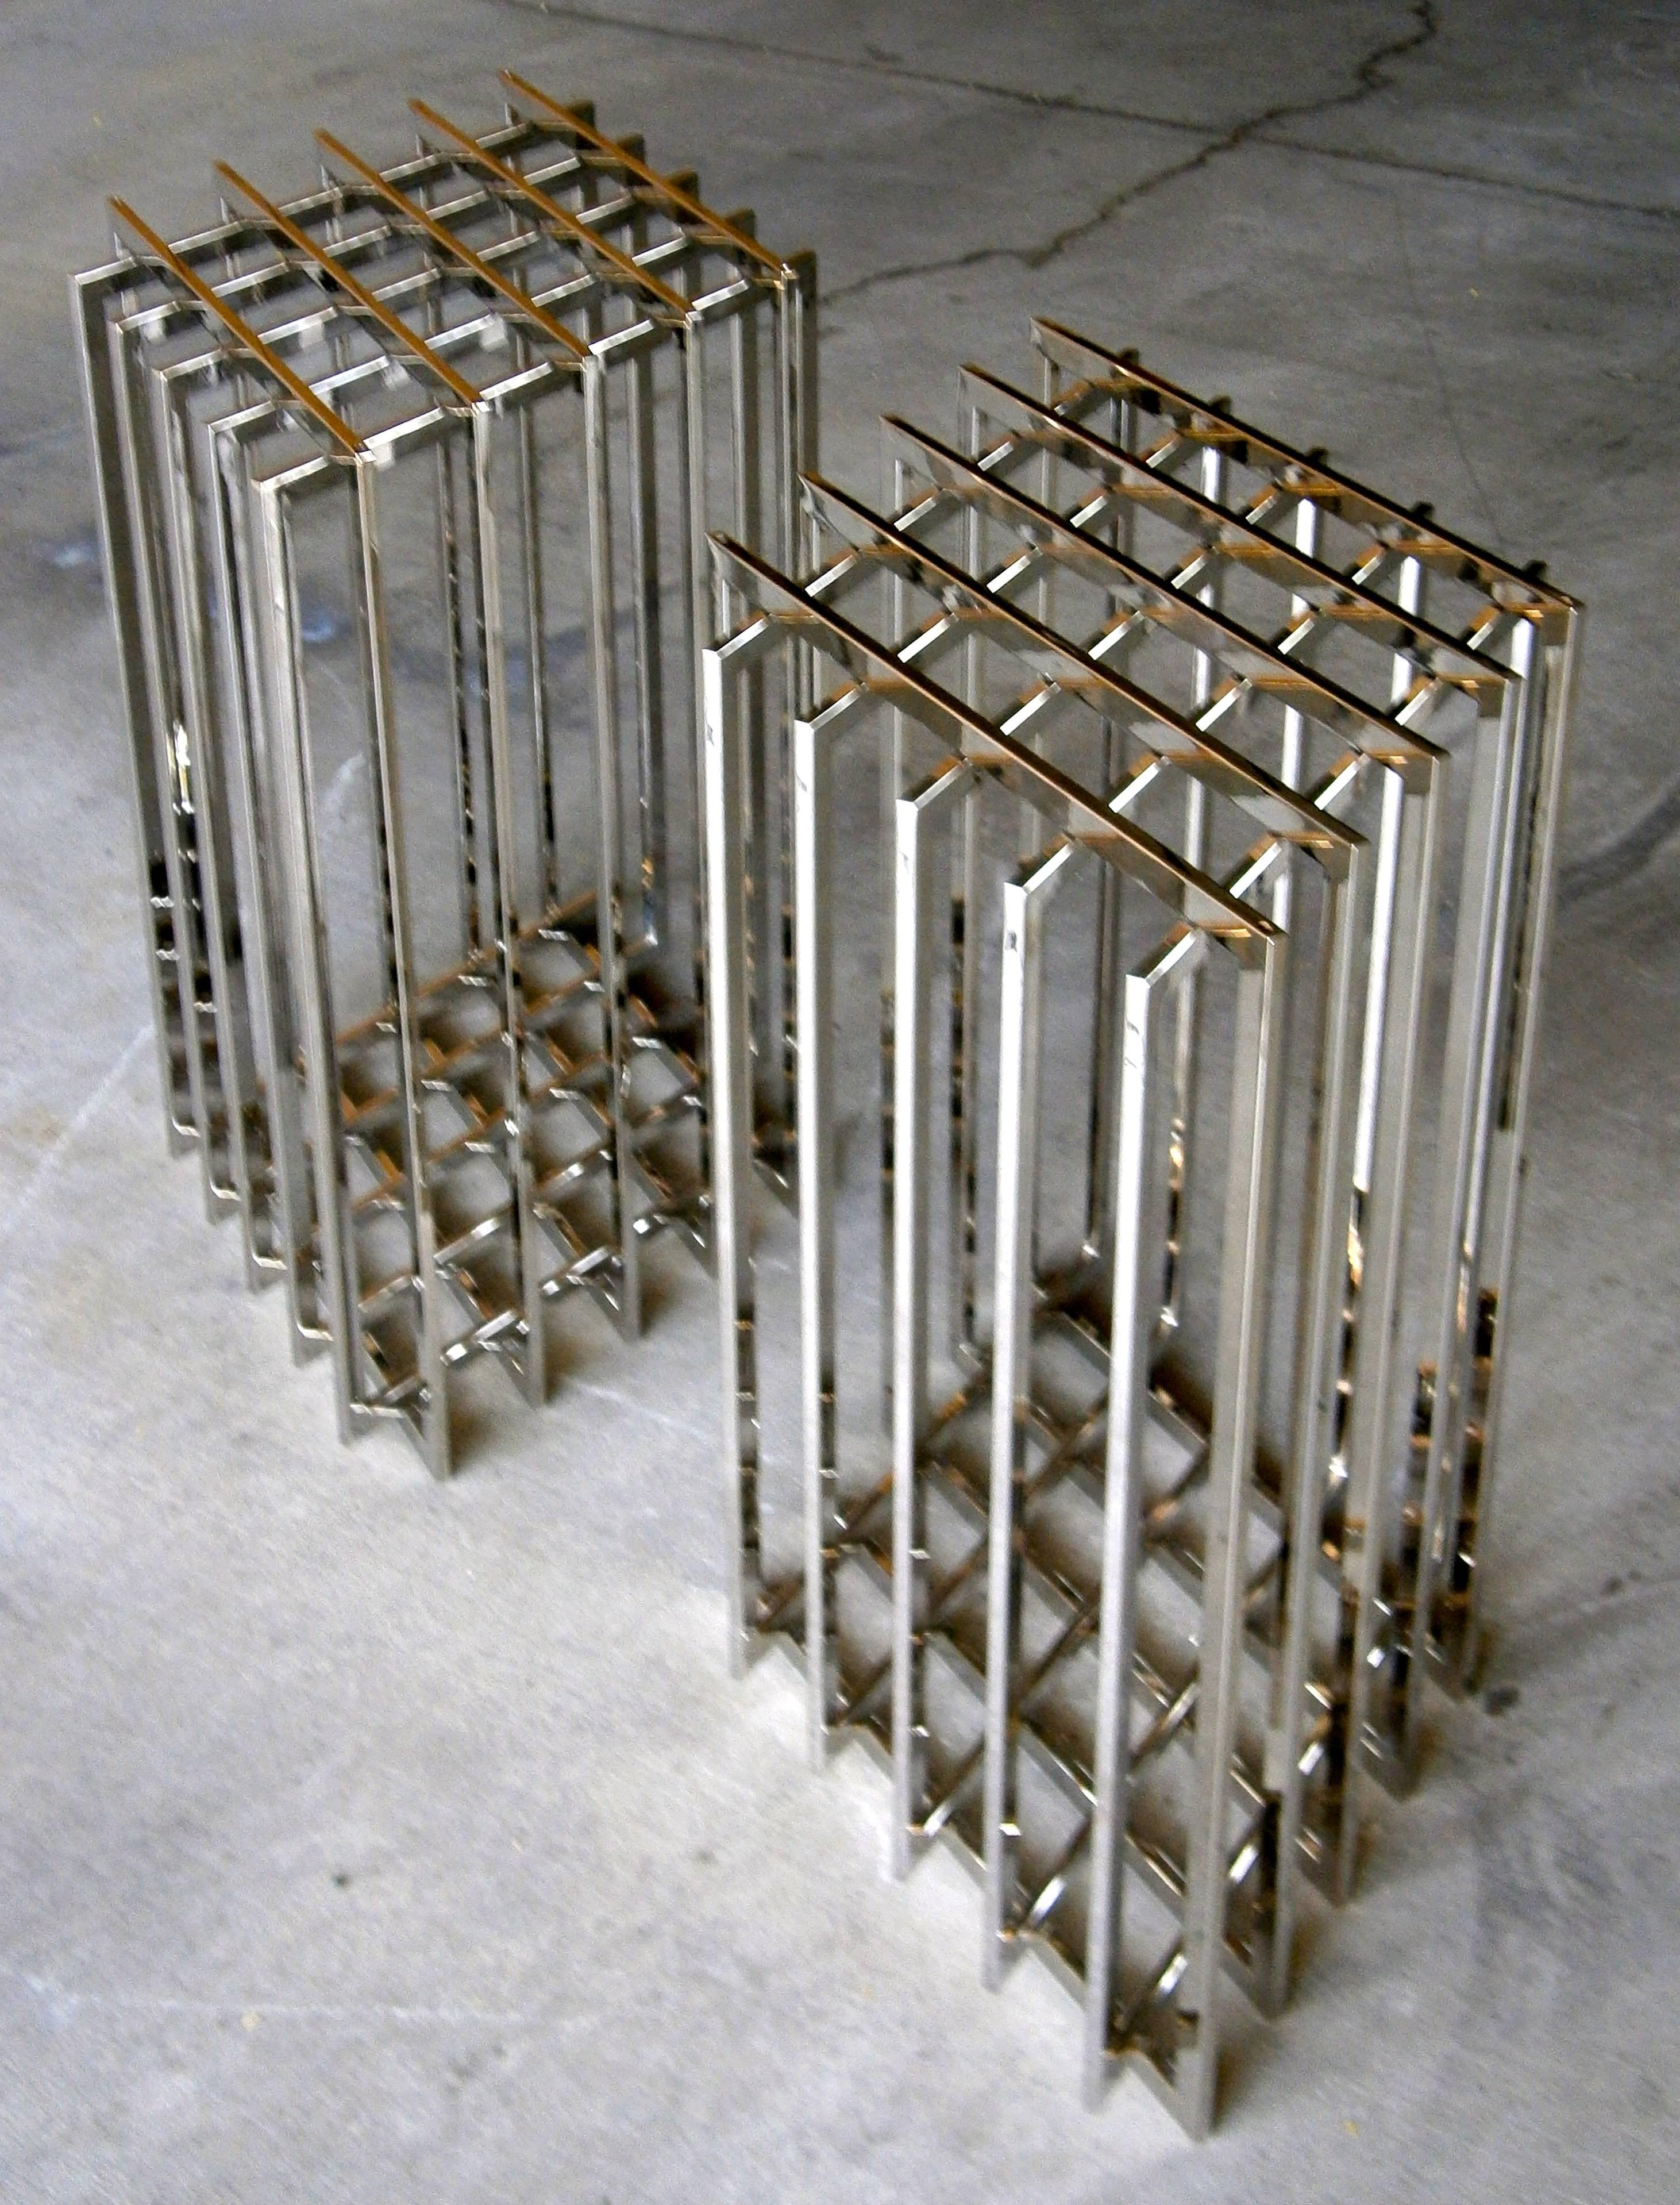 American Pair of Nickel Plated Cage-Form Table Bases by Pierre Cardin  C. 1970s